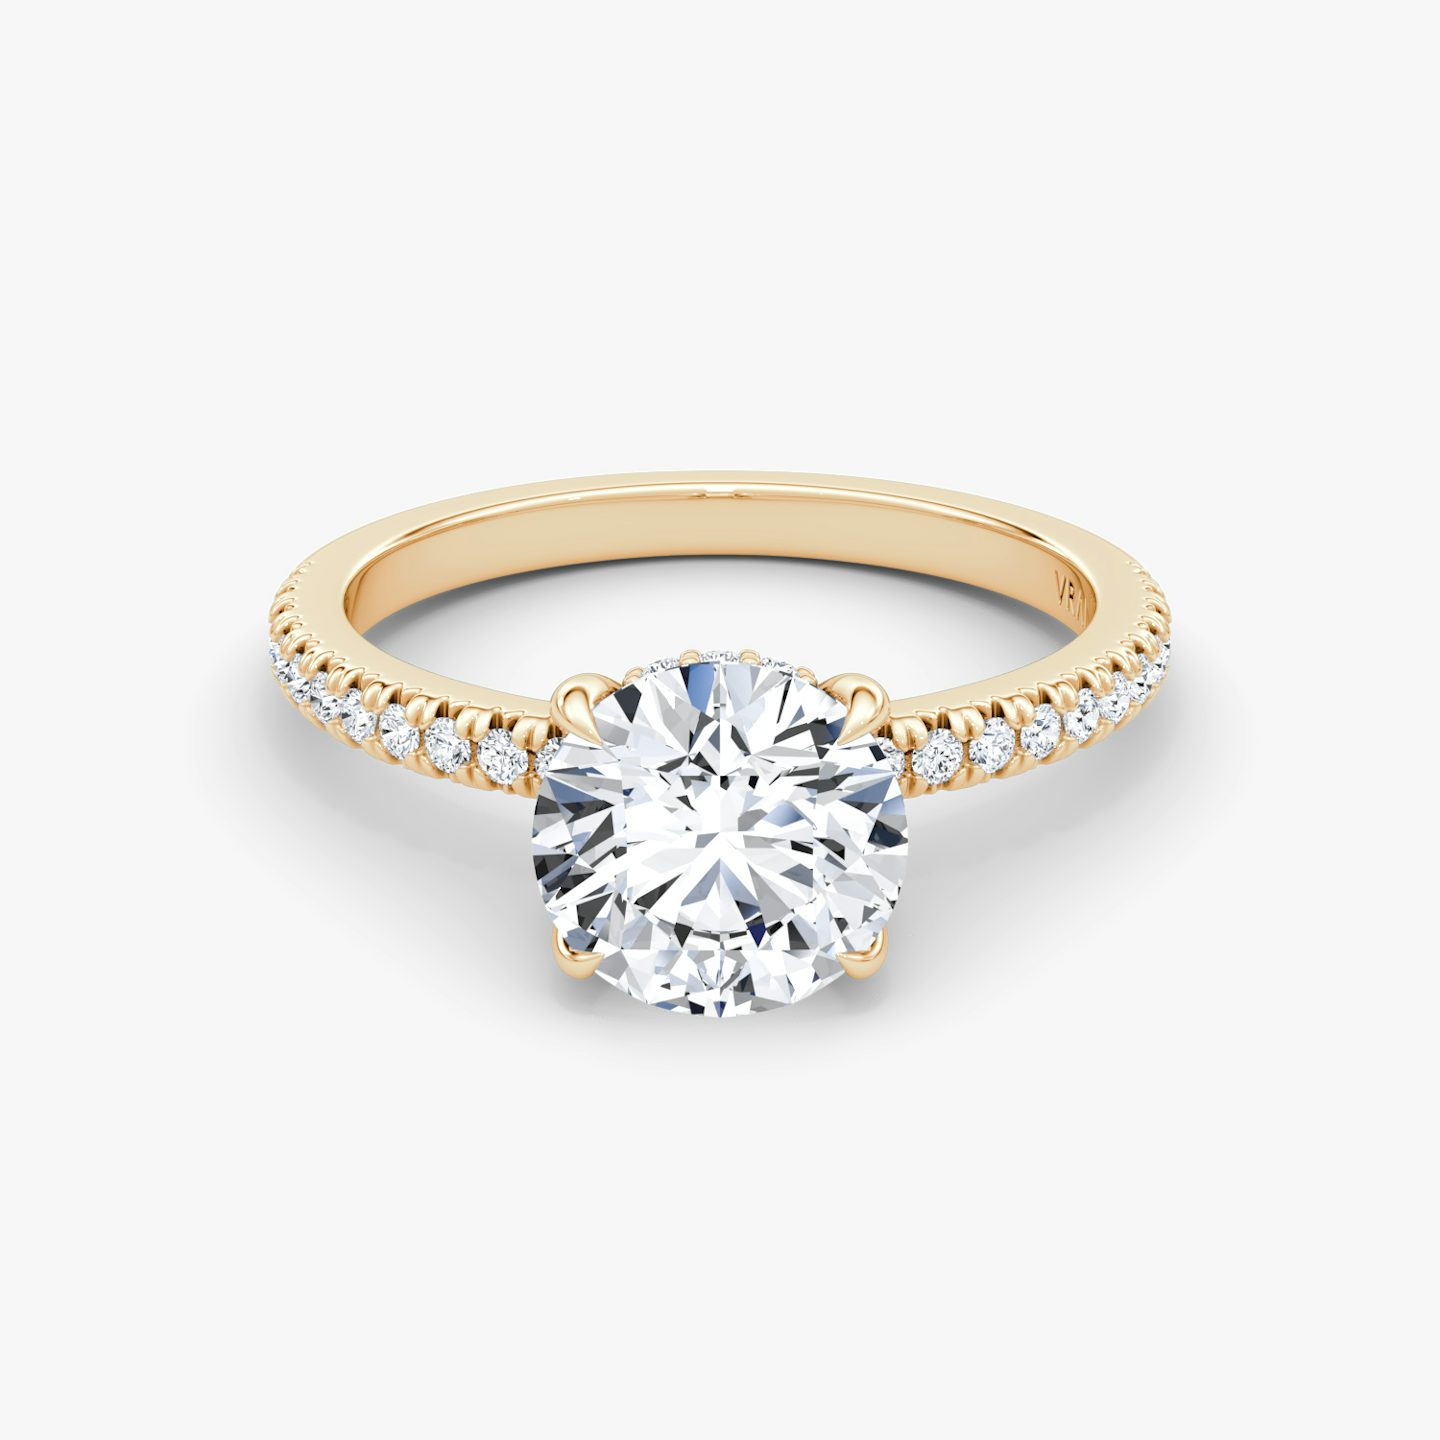 The Floating Solitaire | Round Brilliant | 14k | Rose Gold | bandAccent: Pavé | caratWeight: 1.5ct | diamondOrientation: vertical